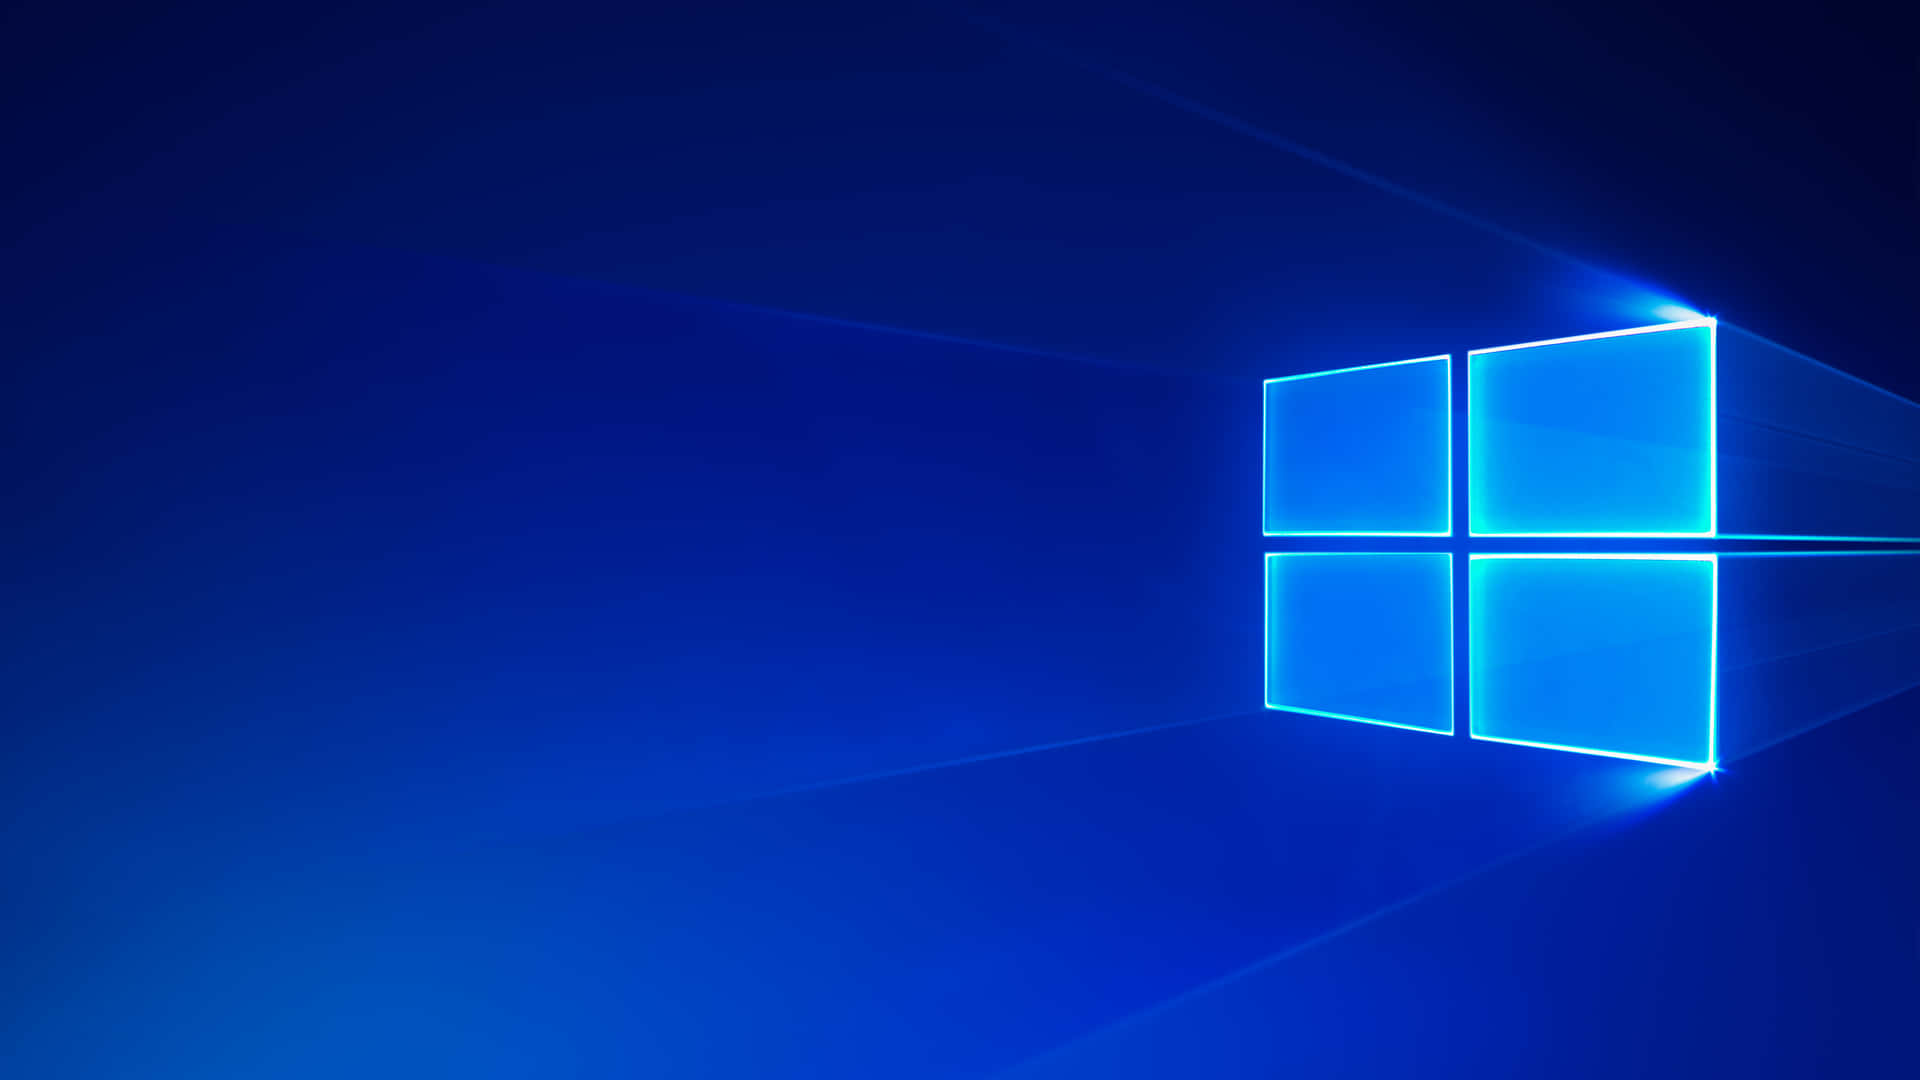 Immerse yourself in the advanced features of Windows 10